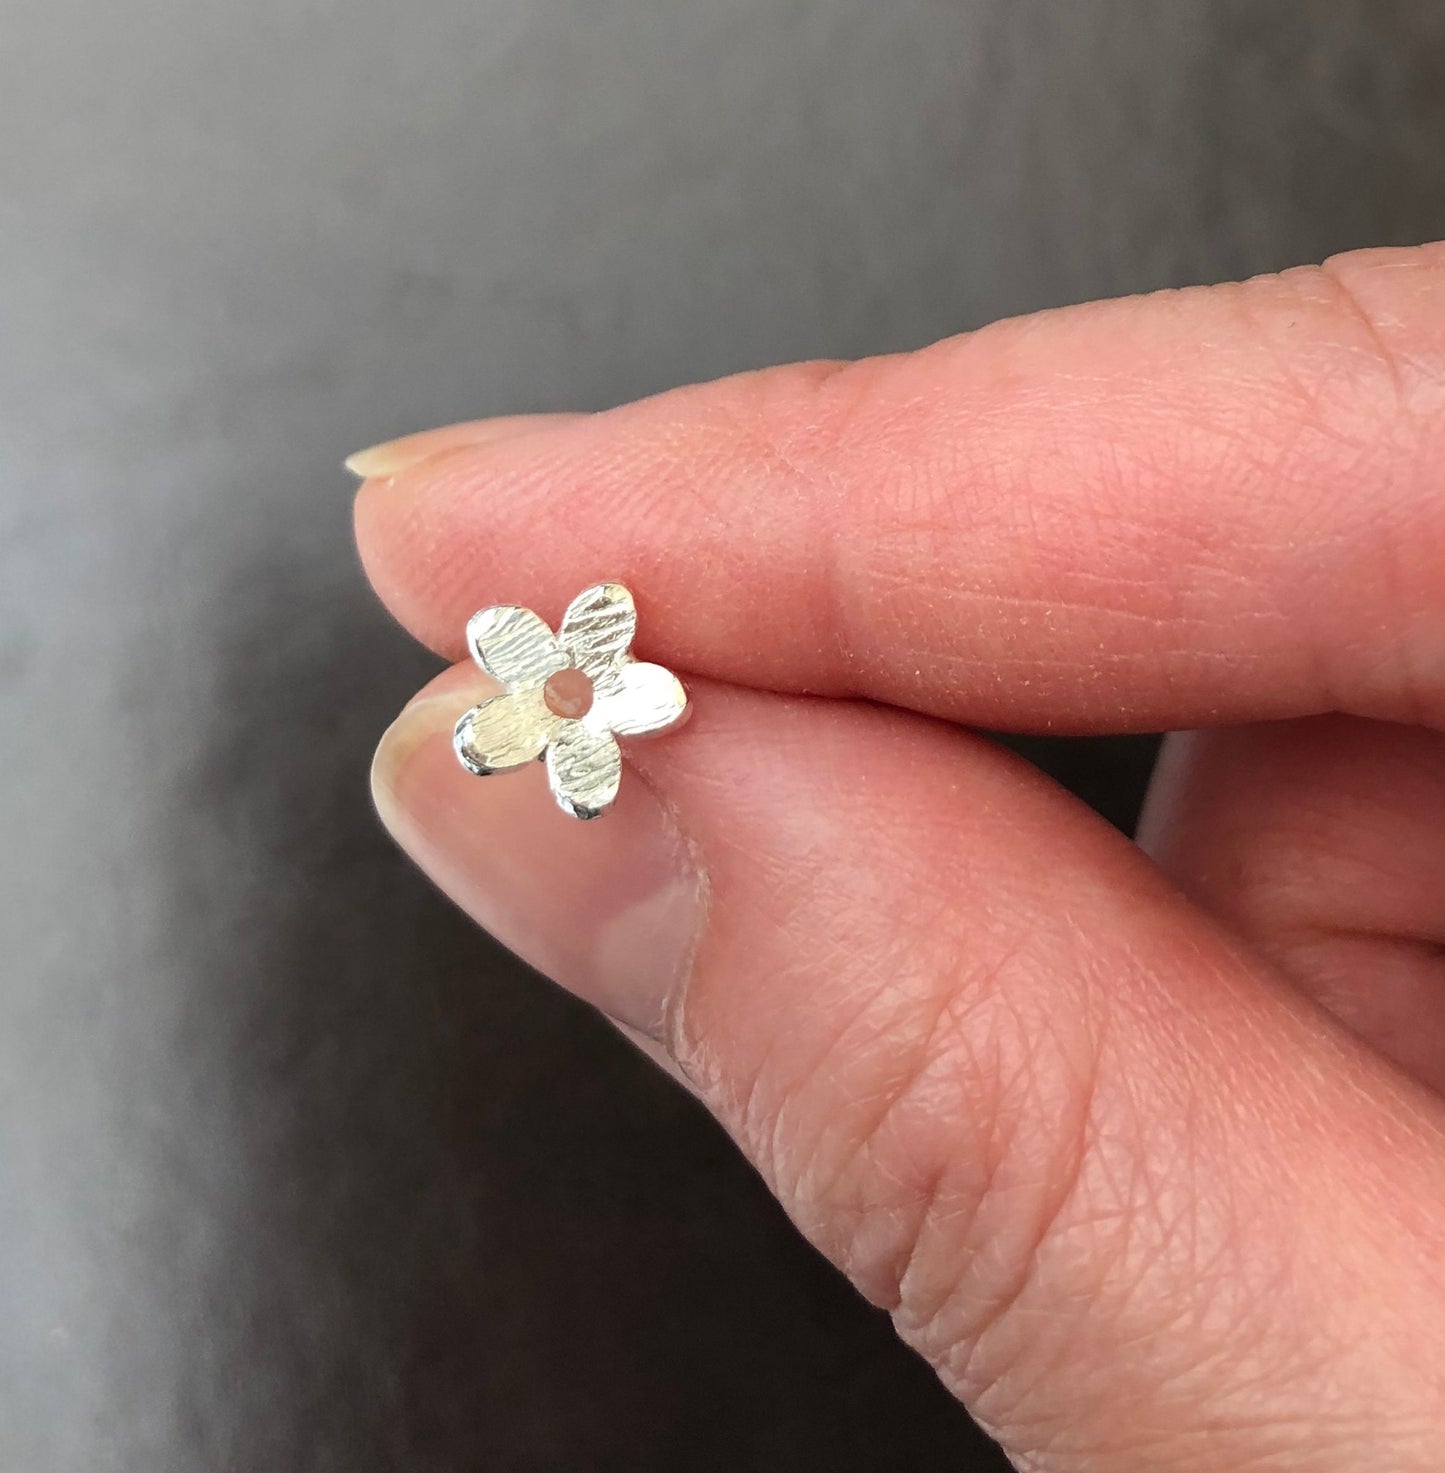 Dainty Flower And Leaf Mismatched Earrings, Sterling Silver Botanical Floral Stud Earrings